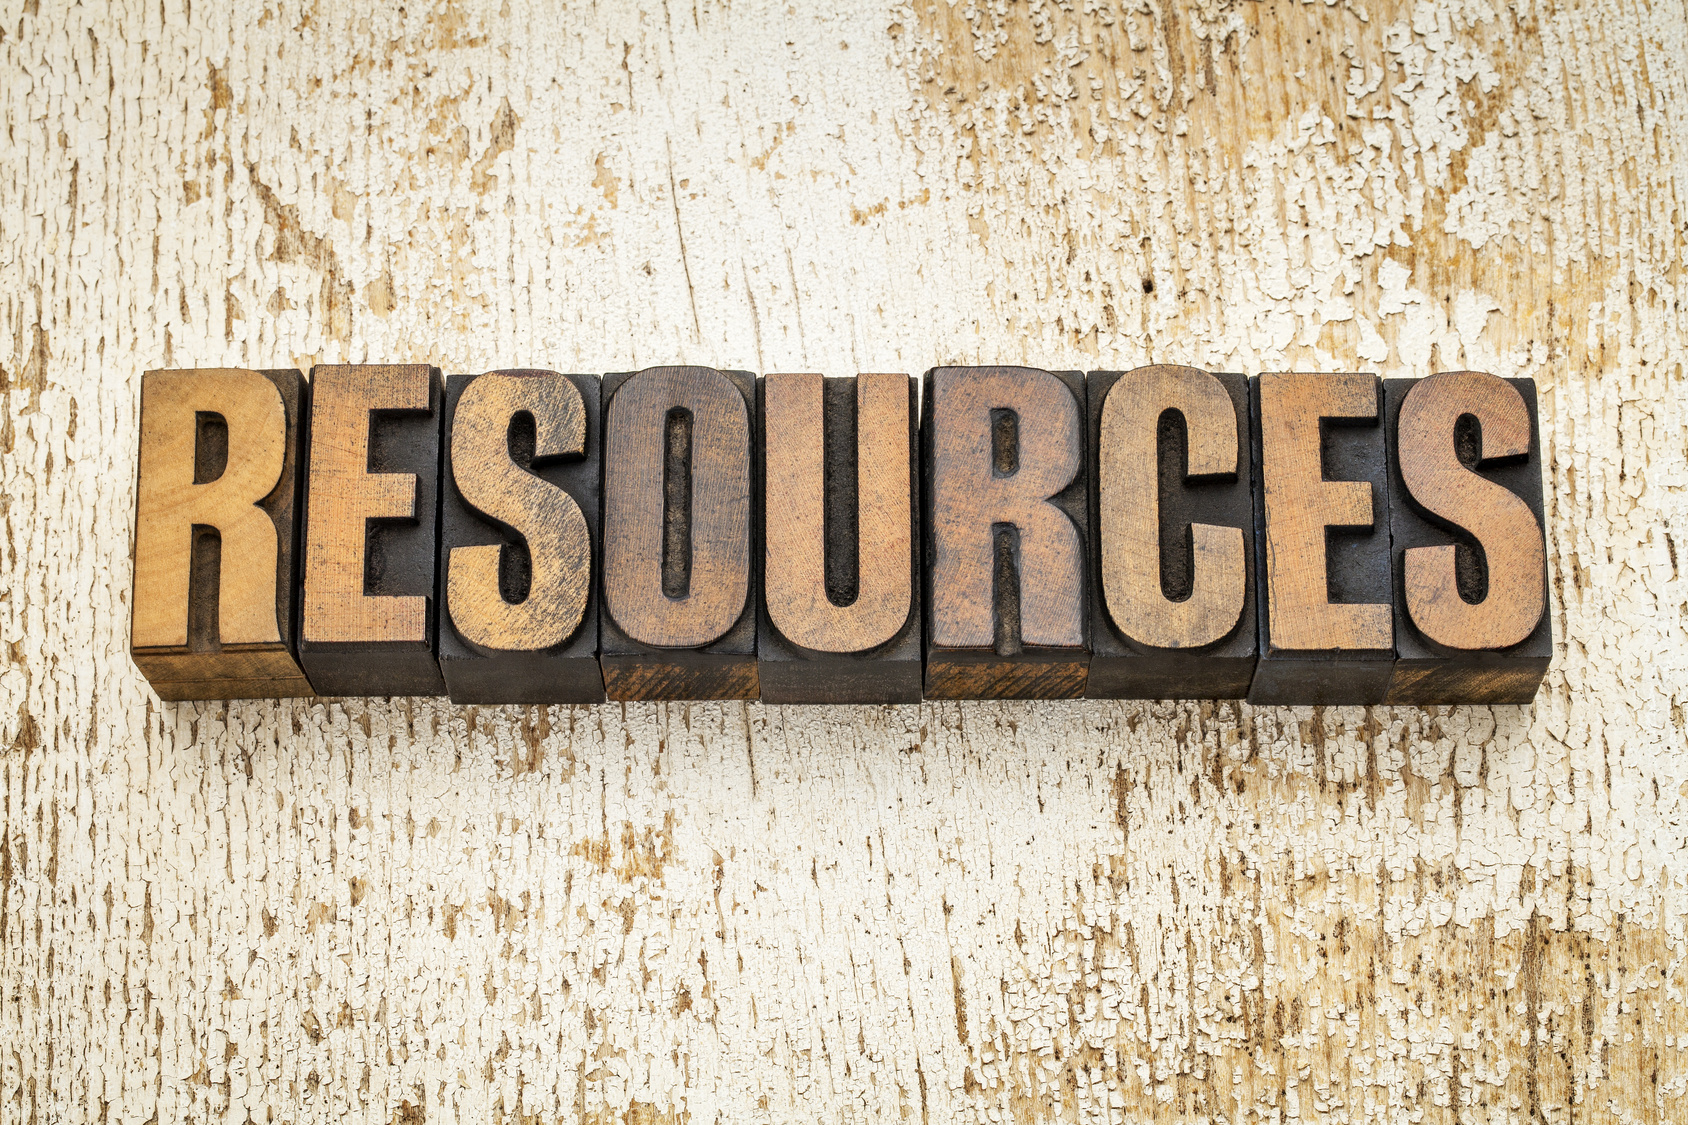 Employer Resources from the Vermont Department of Labor